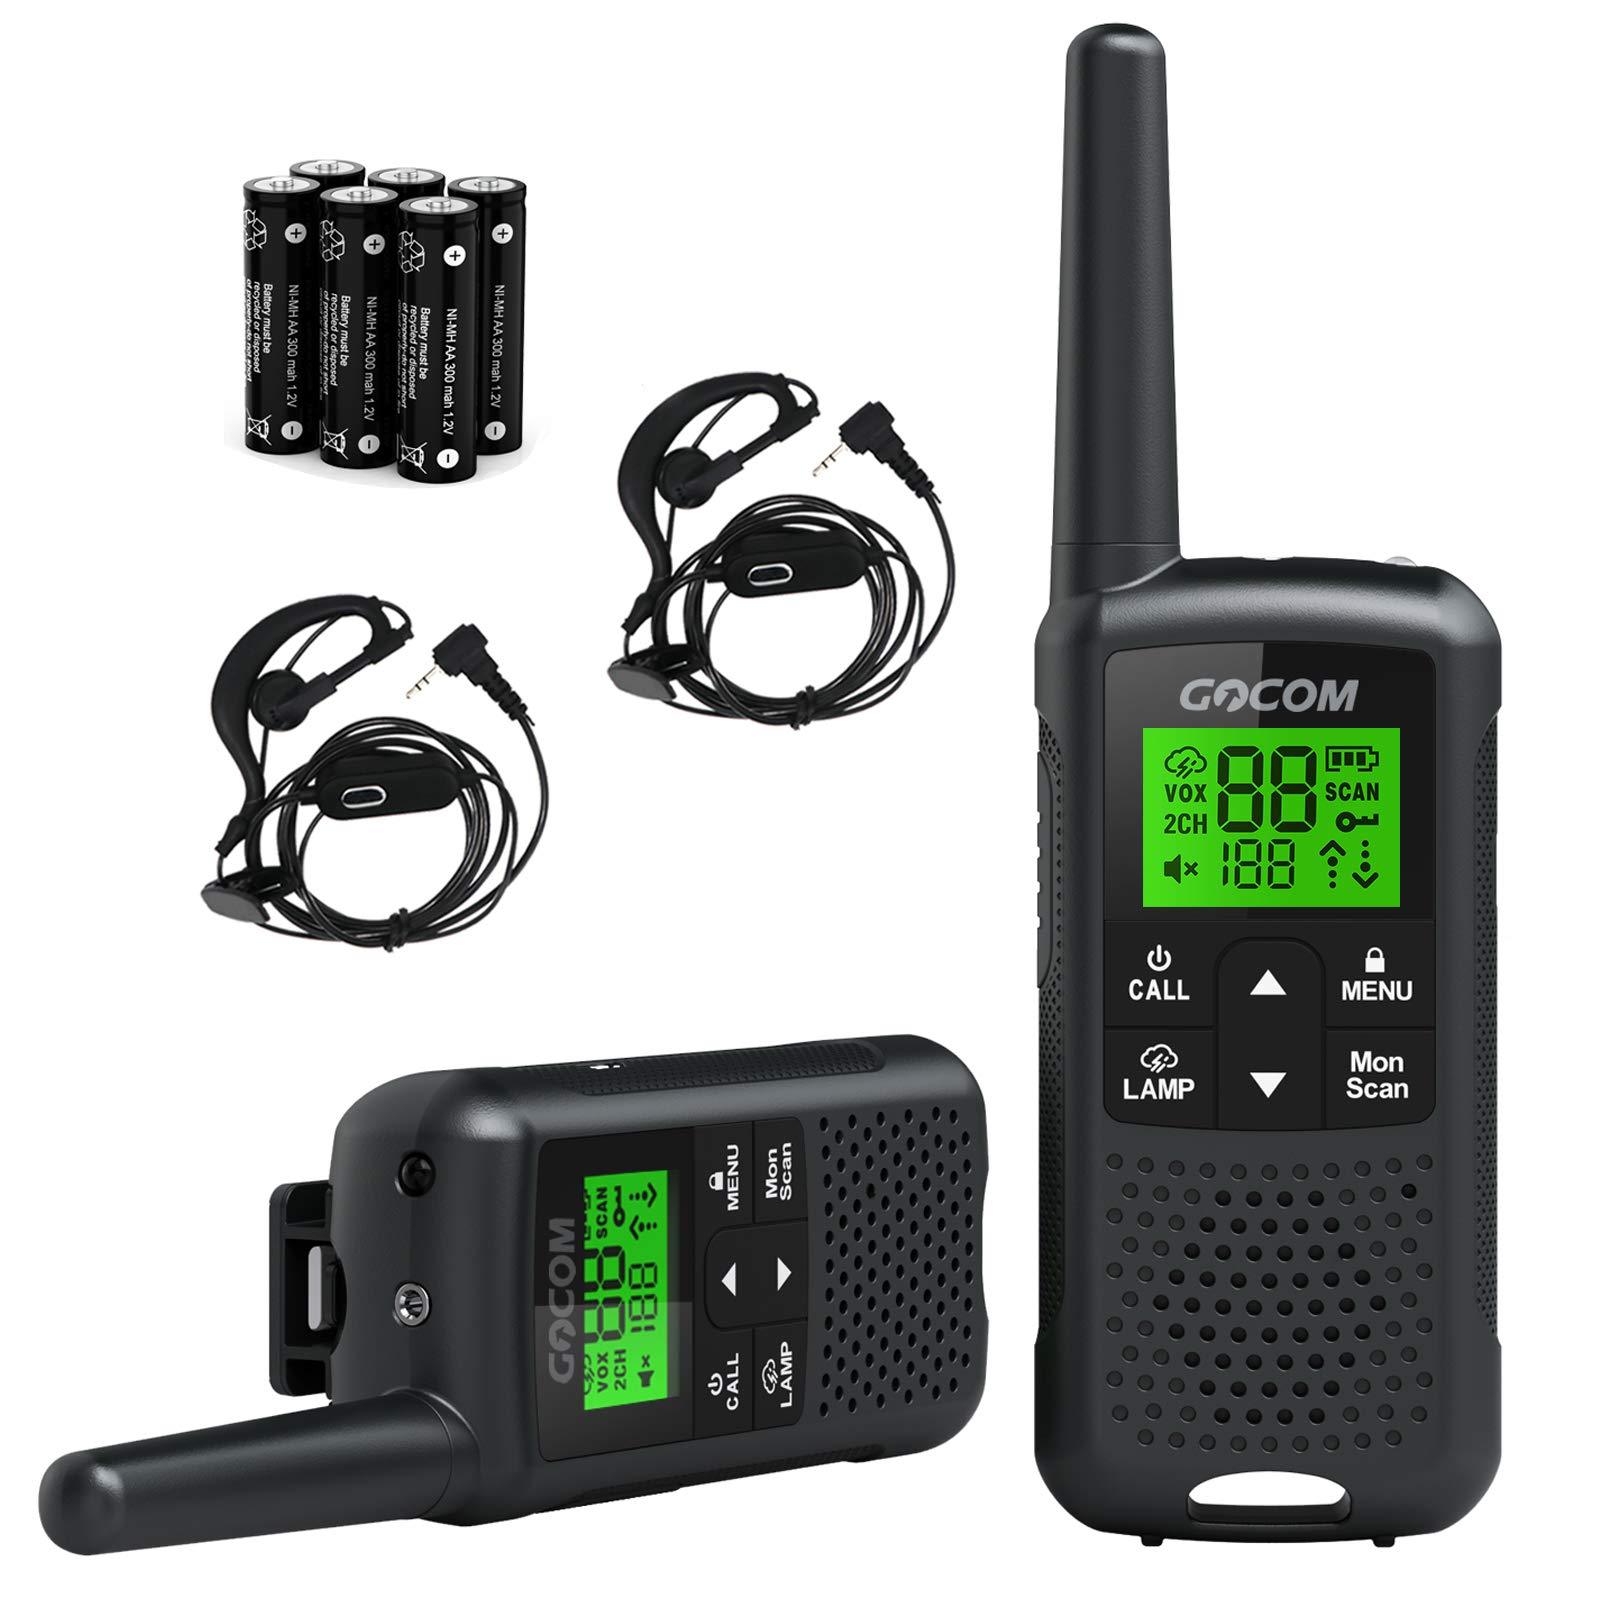 GOCOM G200 Family Radio Service (FRS) Walkie Talkies for Adults, Long Range  Two Way Radios Rechargeable 22 CH NOAA VOX Scan Flashlight Frequency Range:462.55-462.725MHz,467.5625-467.7125MHz  UHF BeesActive Australia